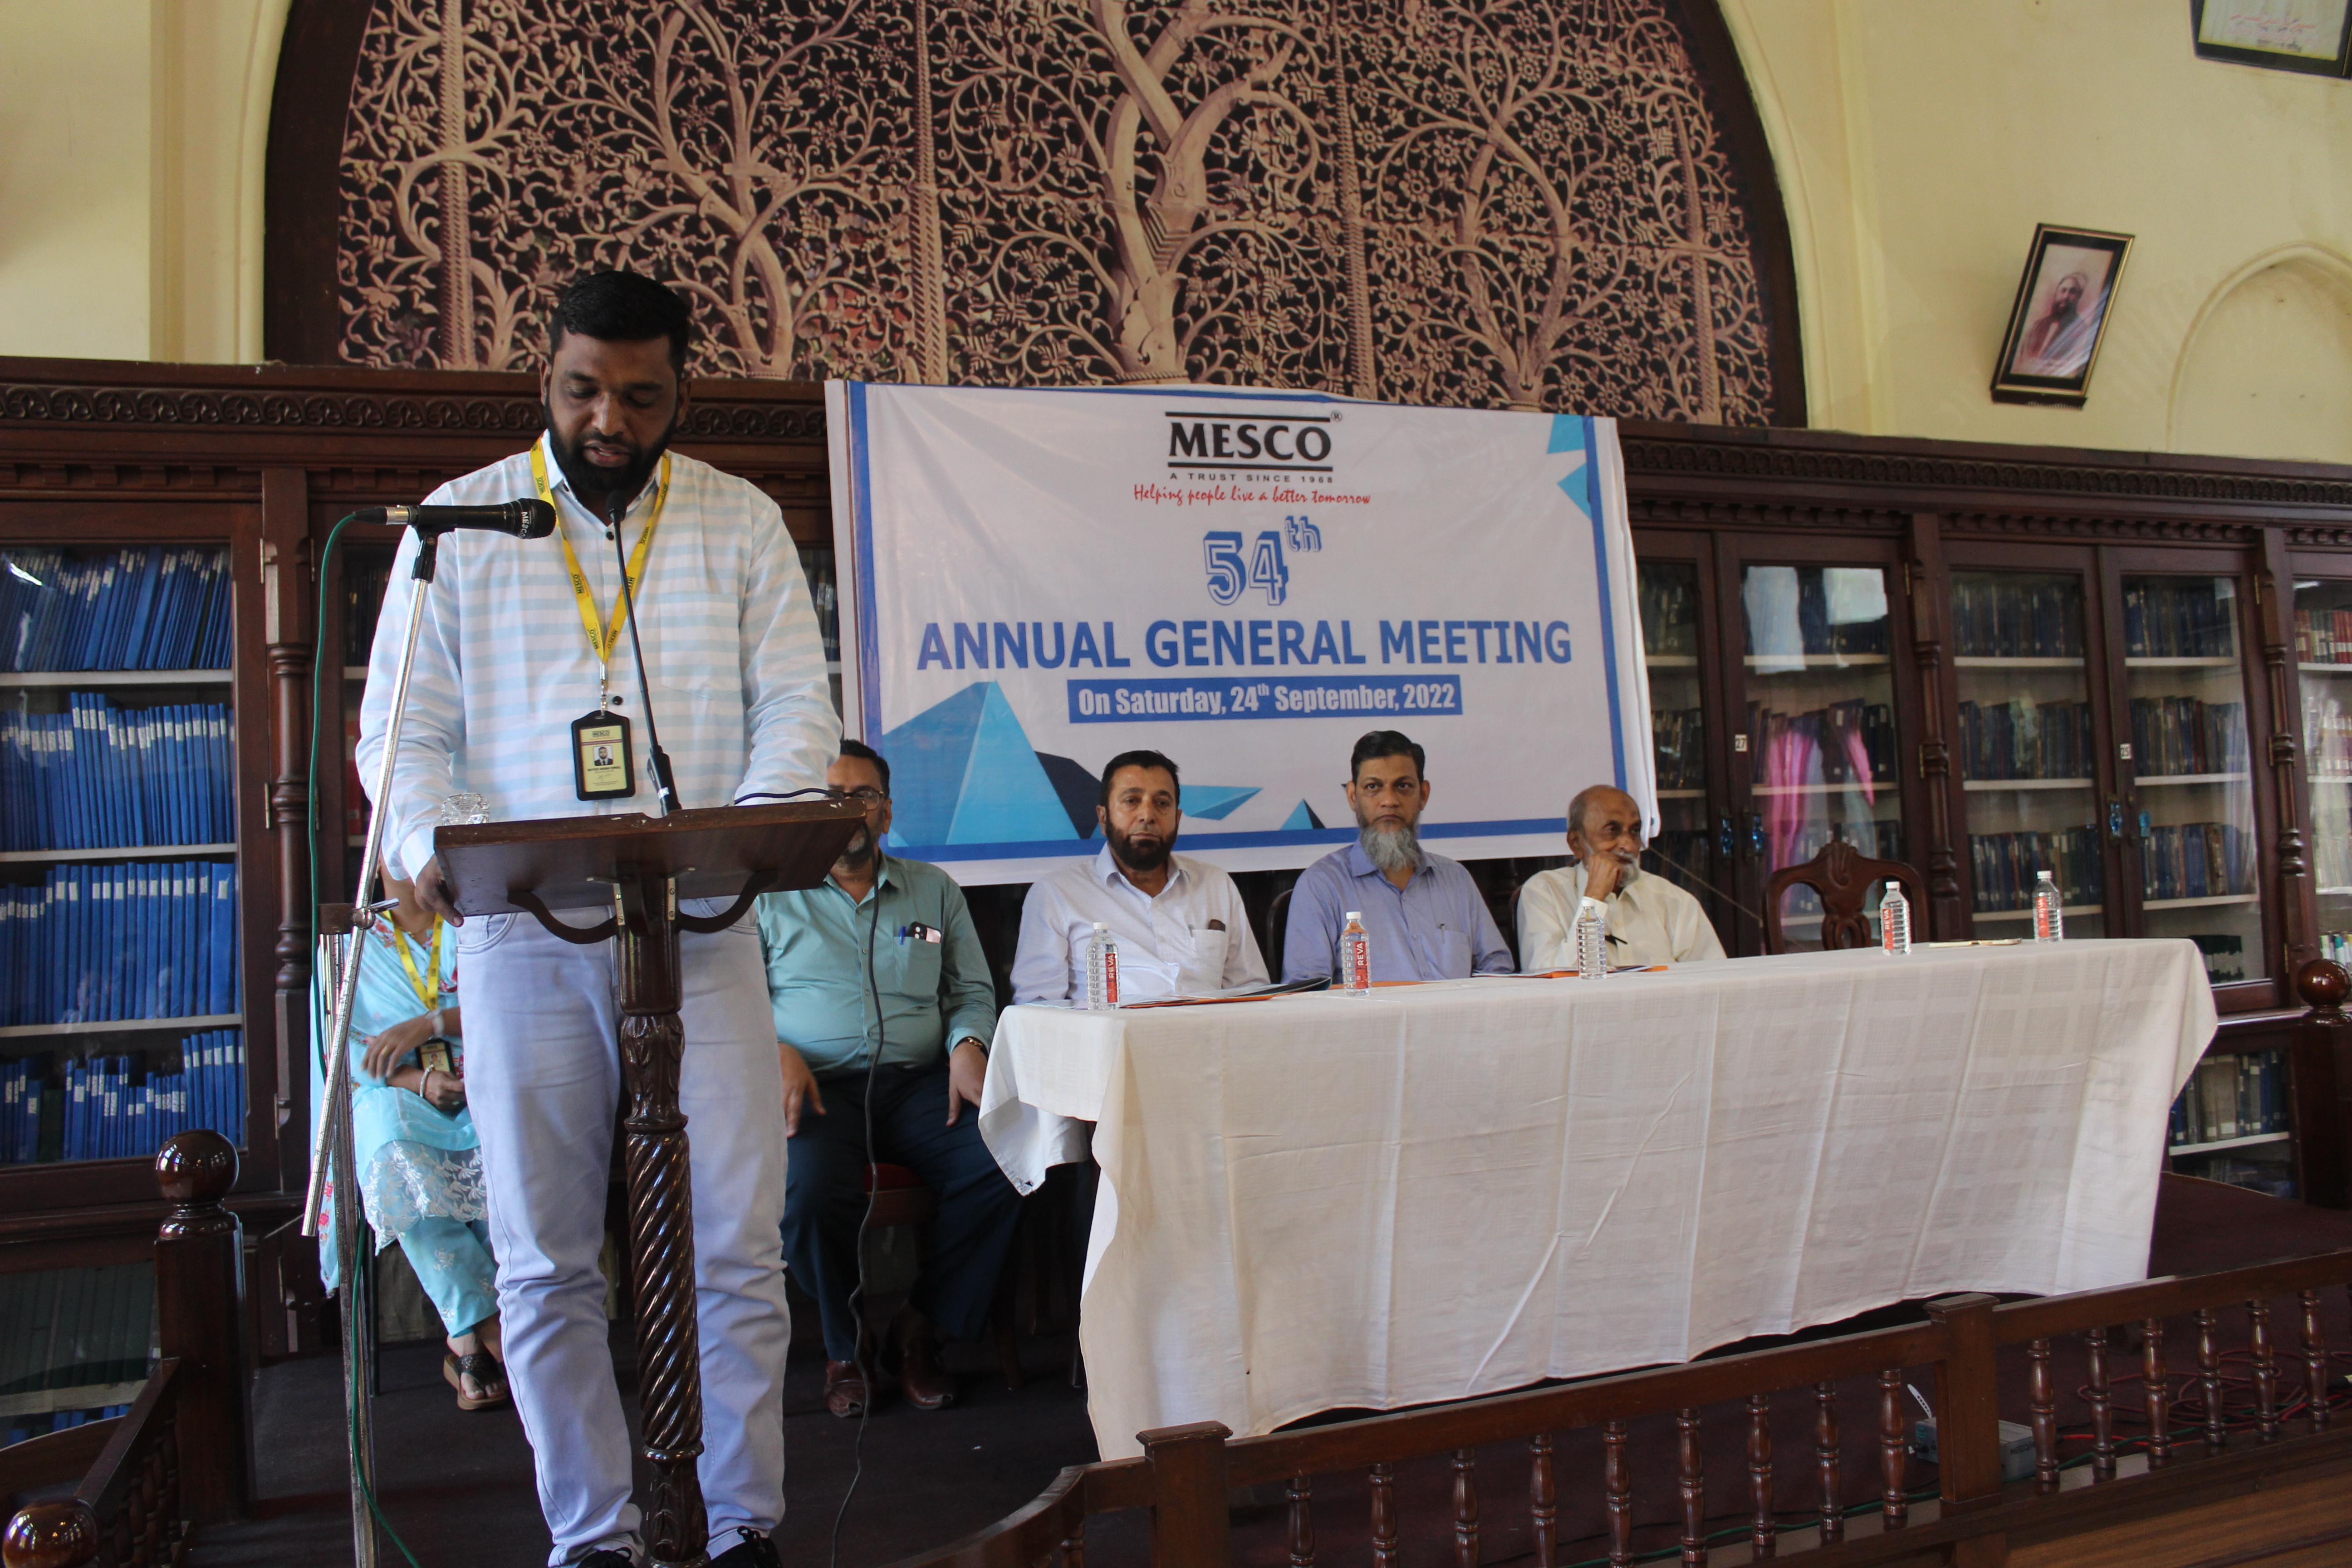 54th Annual General Meeting